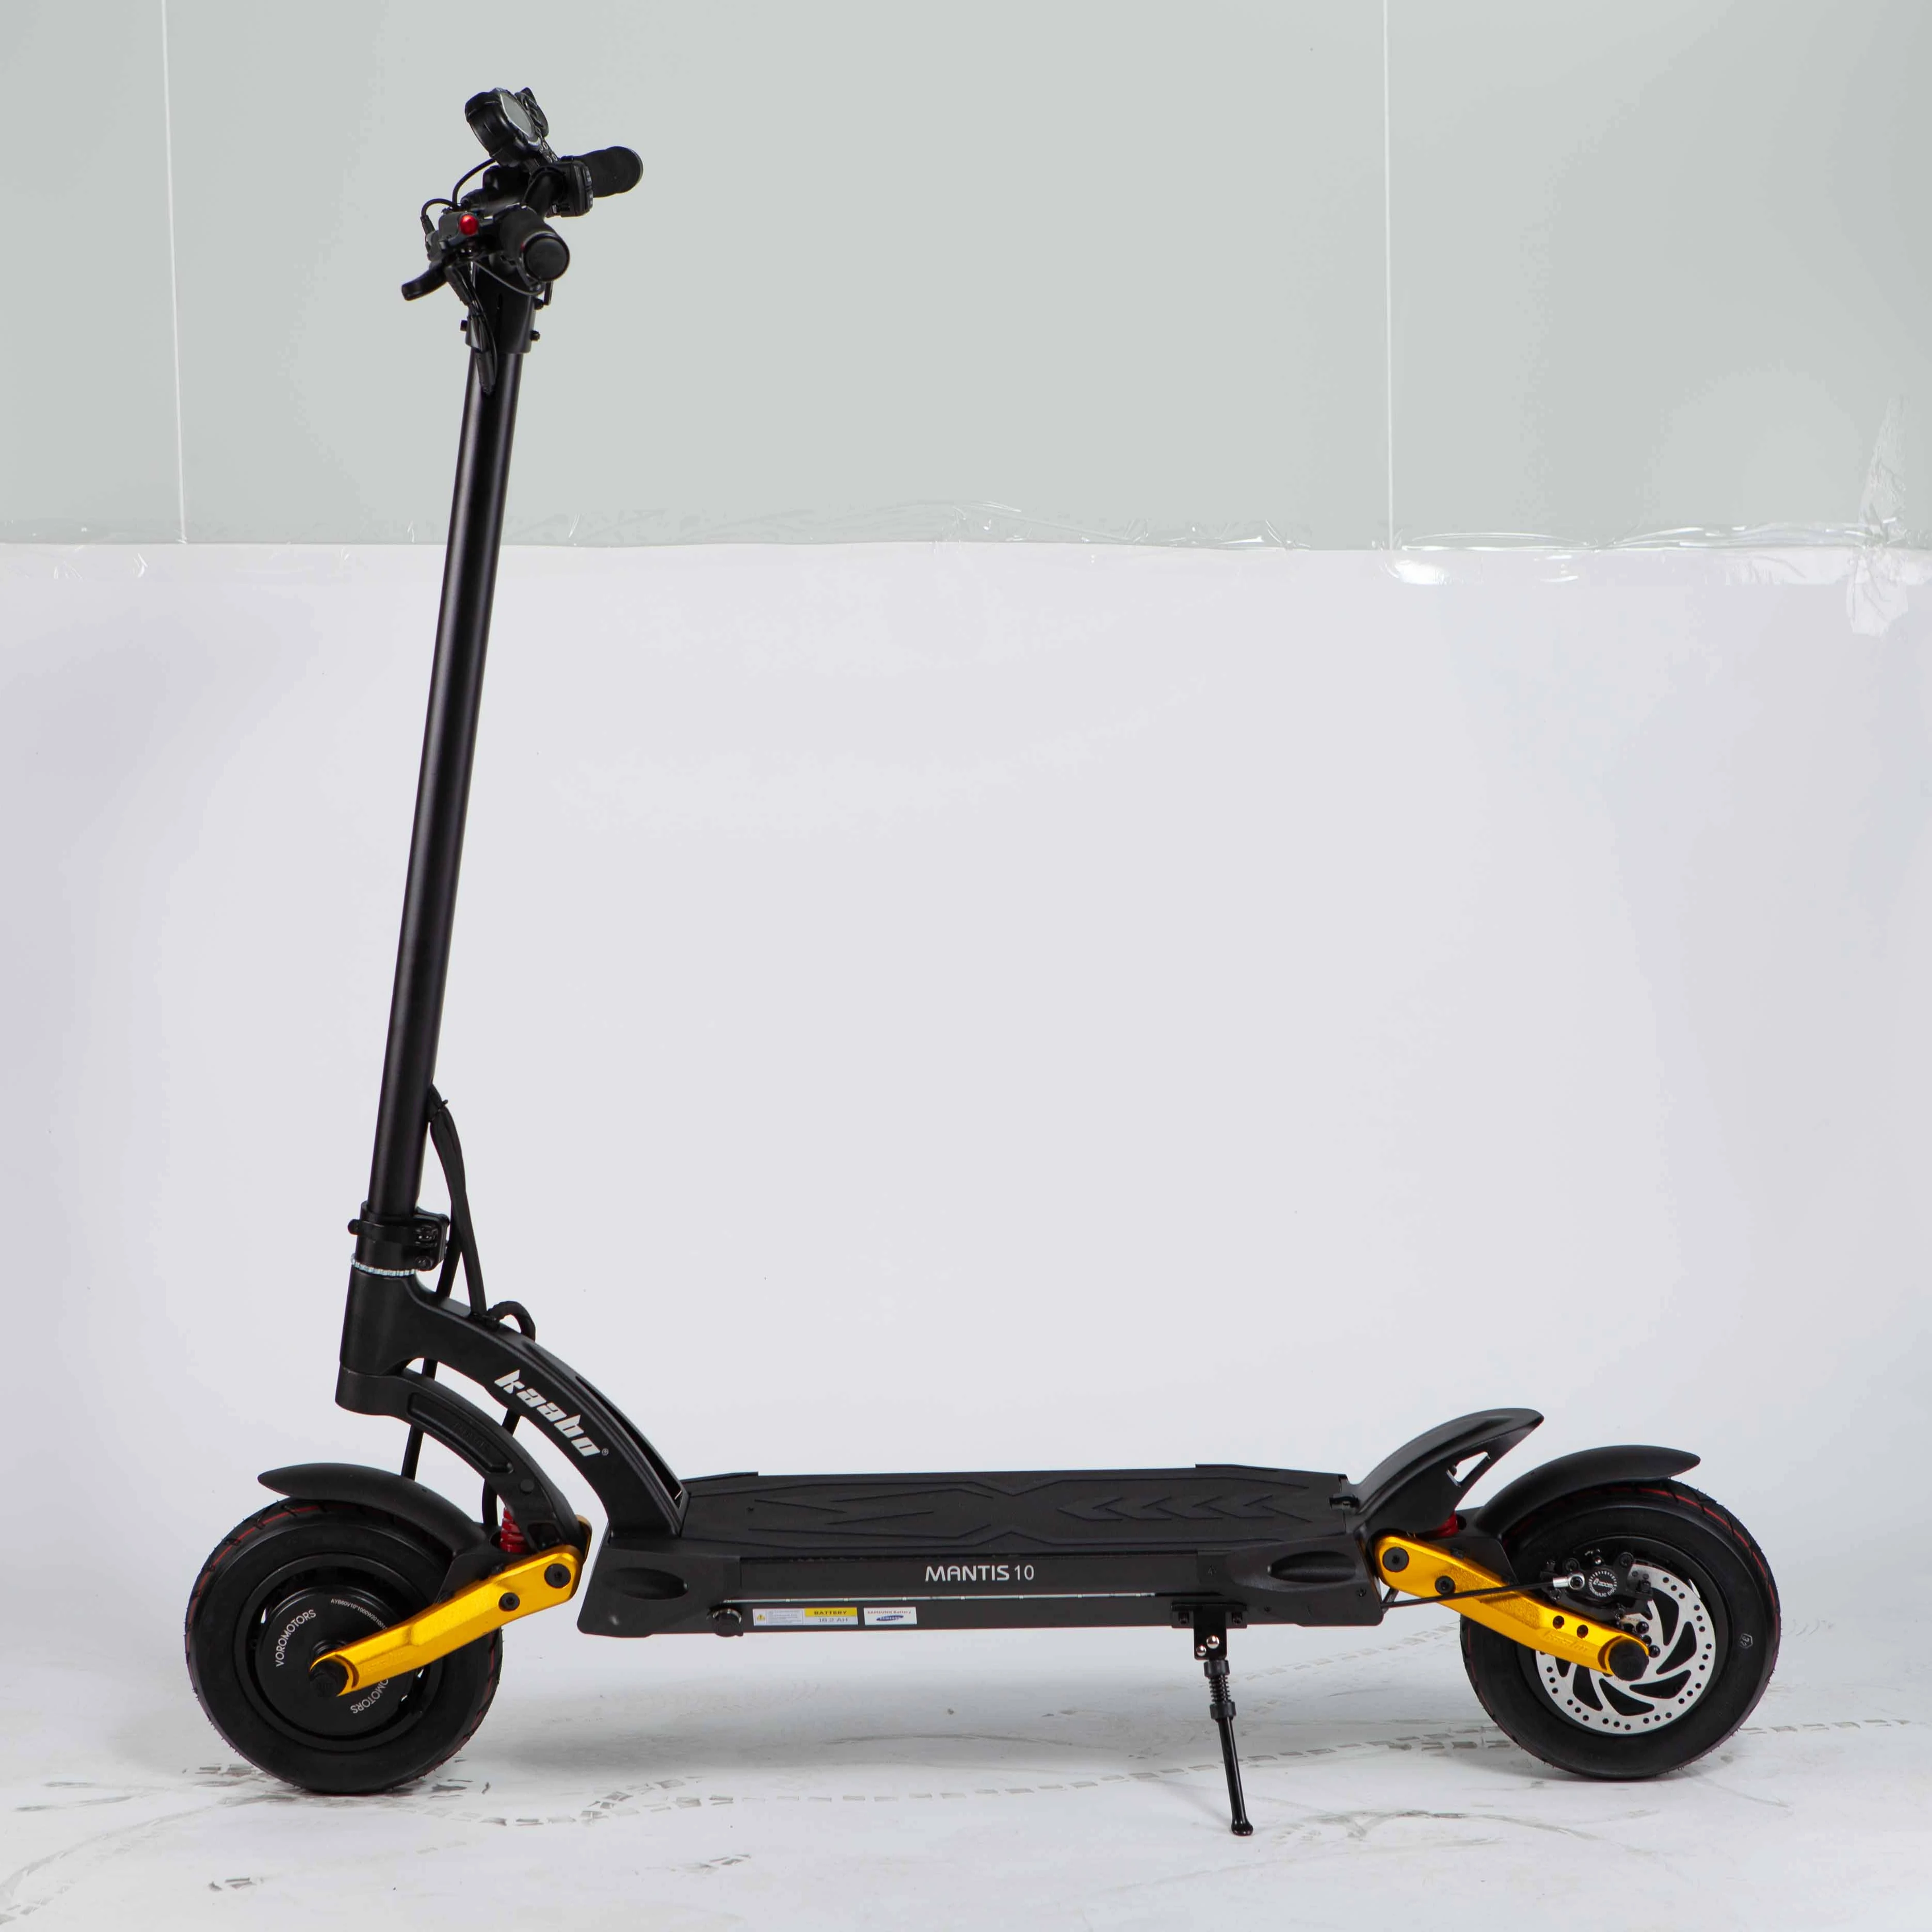 

2000w Dual Motor Mobility Scooter Gold Kaabo Mantis Pro+ Electric Scooter with 24.5ah Samsung Battery, Black red blue gold